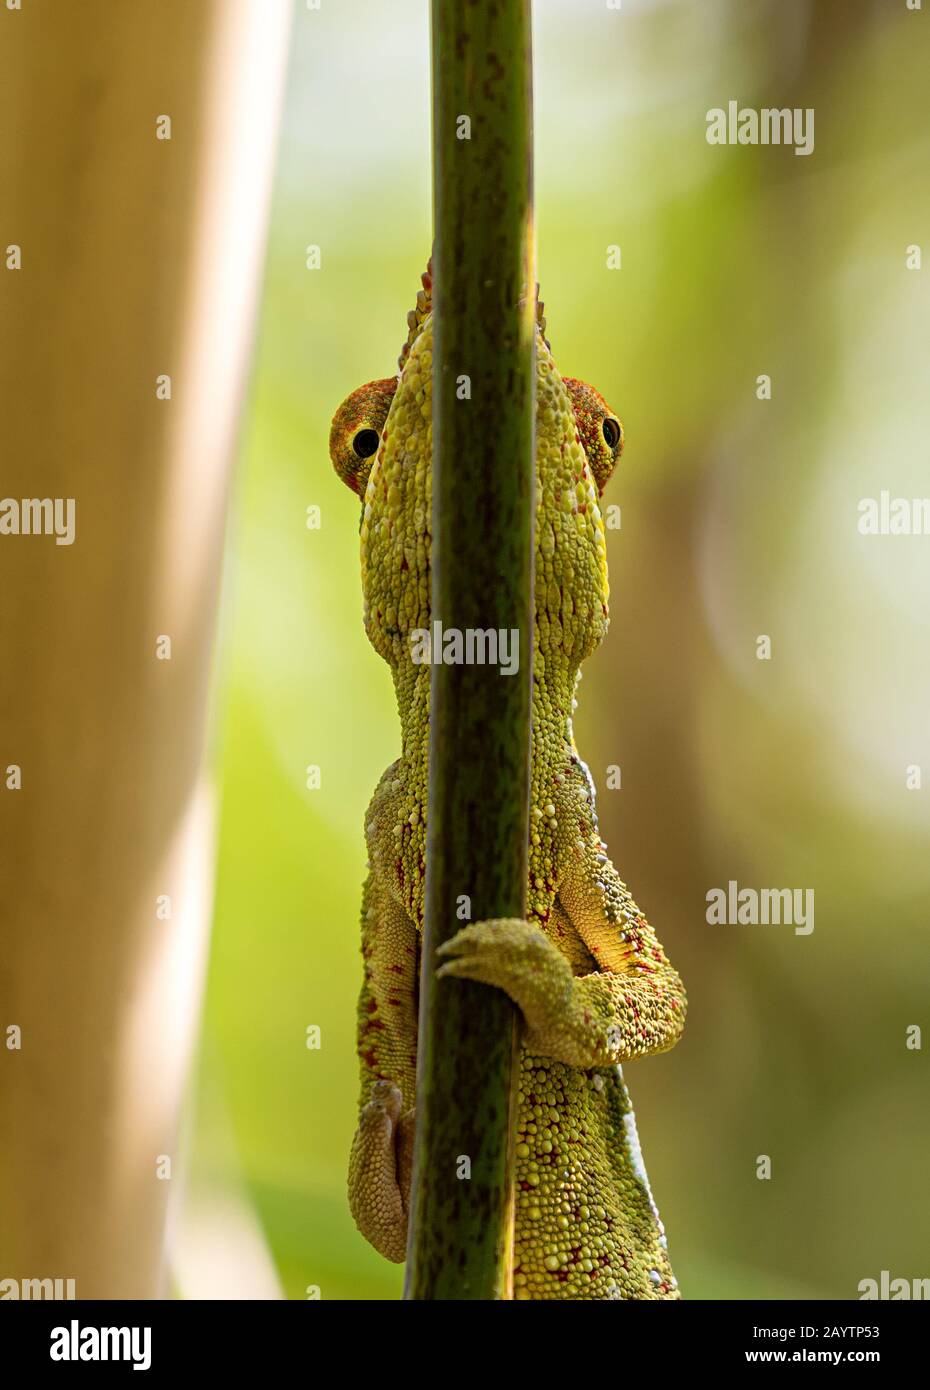 Close-up view of a Panther chameleon (Furcifer pardalis) Stock Photo